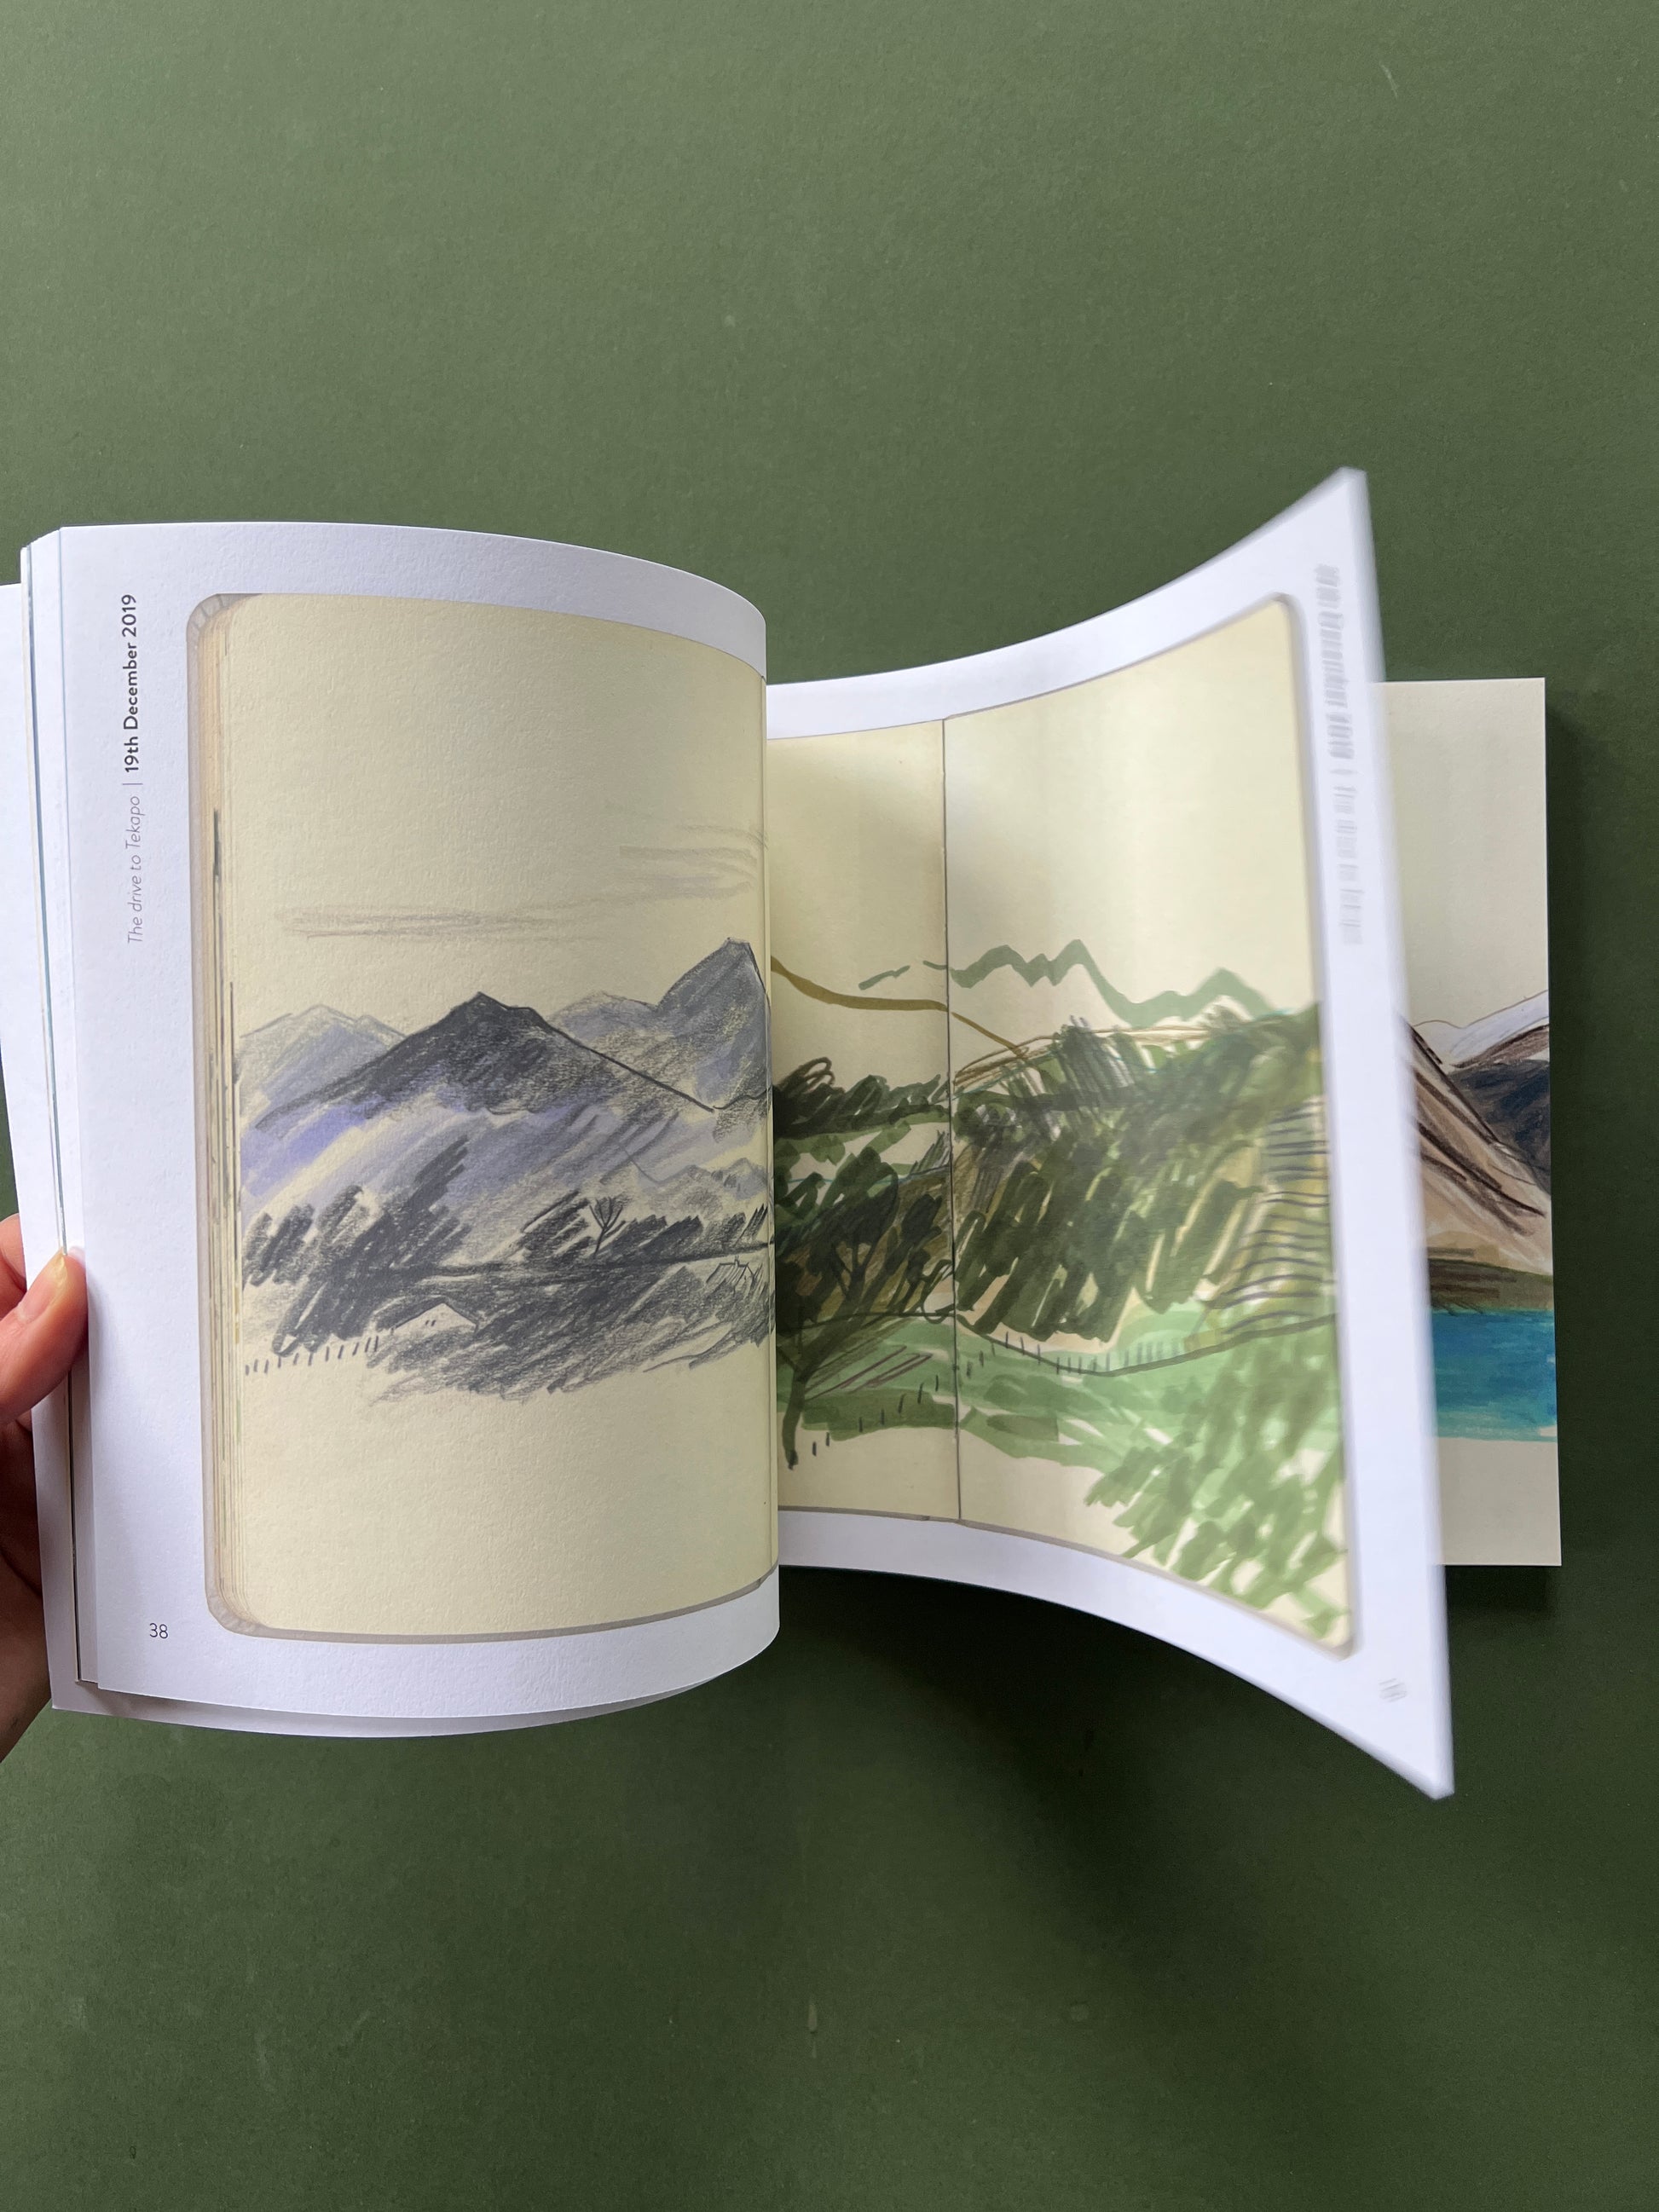 How To Print Your Own Book: 3 Places To Self Publish a Book - Shopify New  Zealand